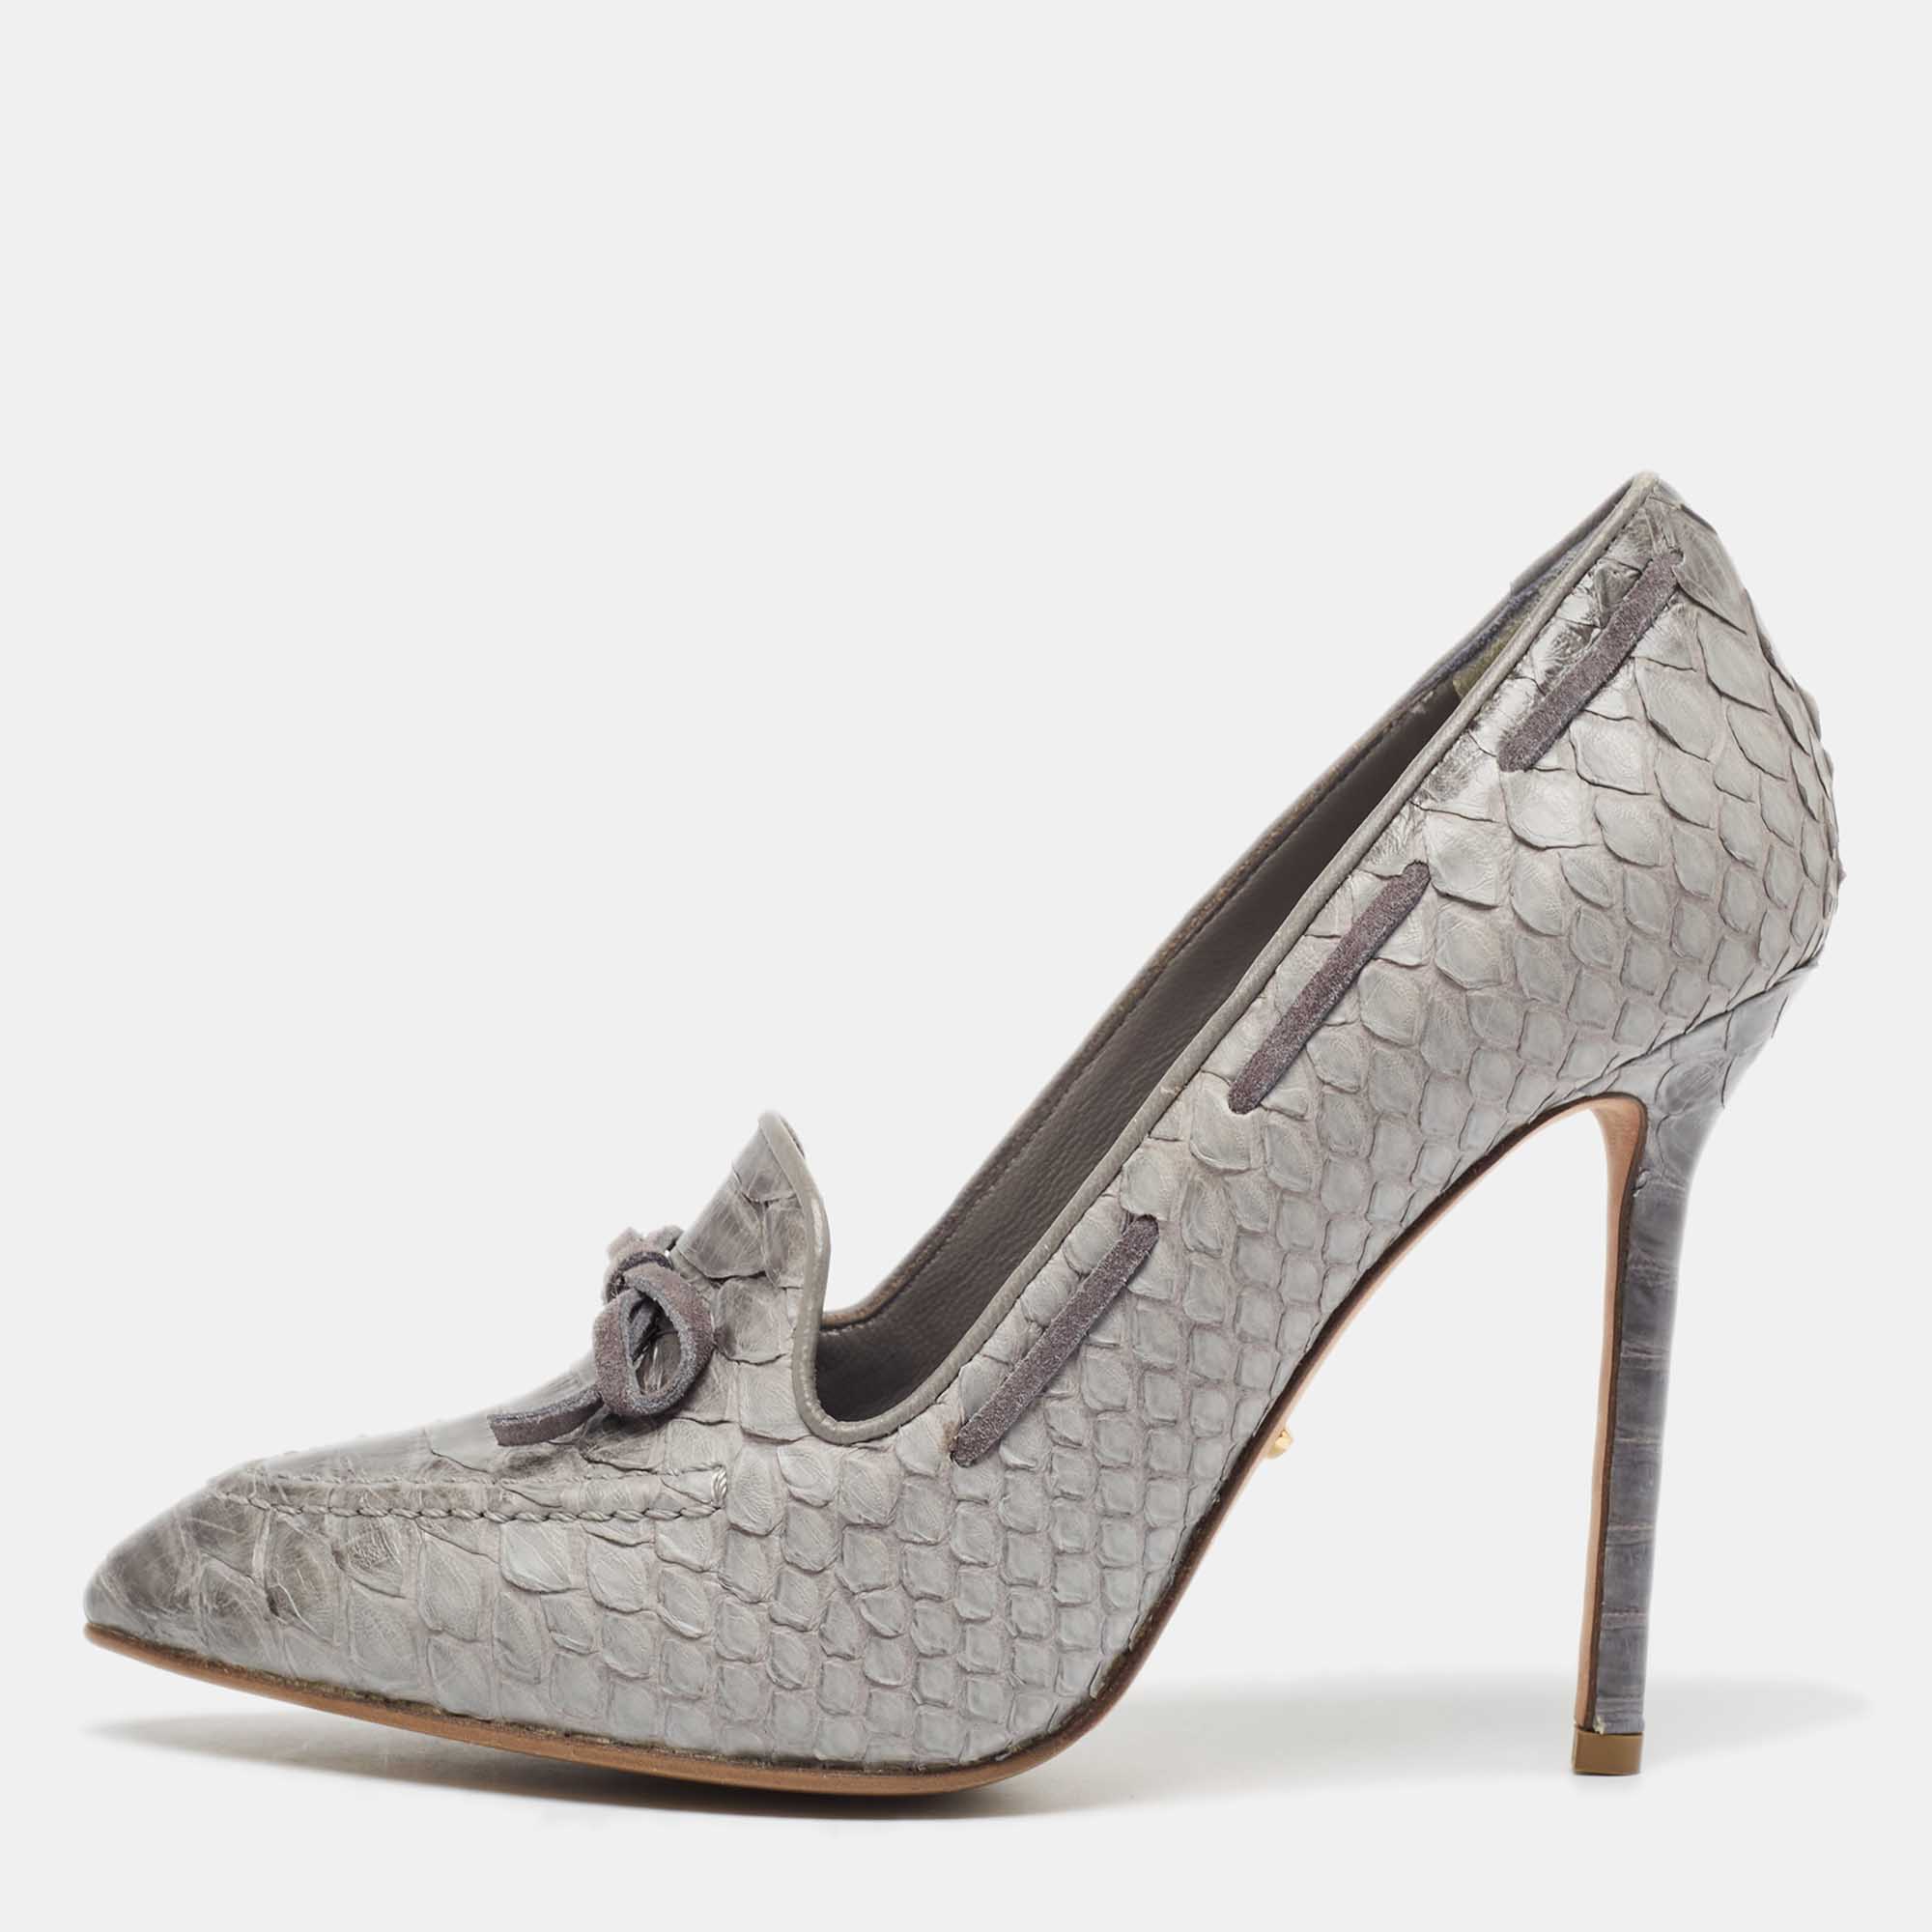 Sergio rossi grey python bow loafer pumps size 38.5